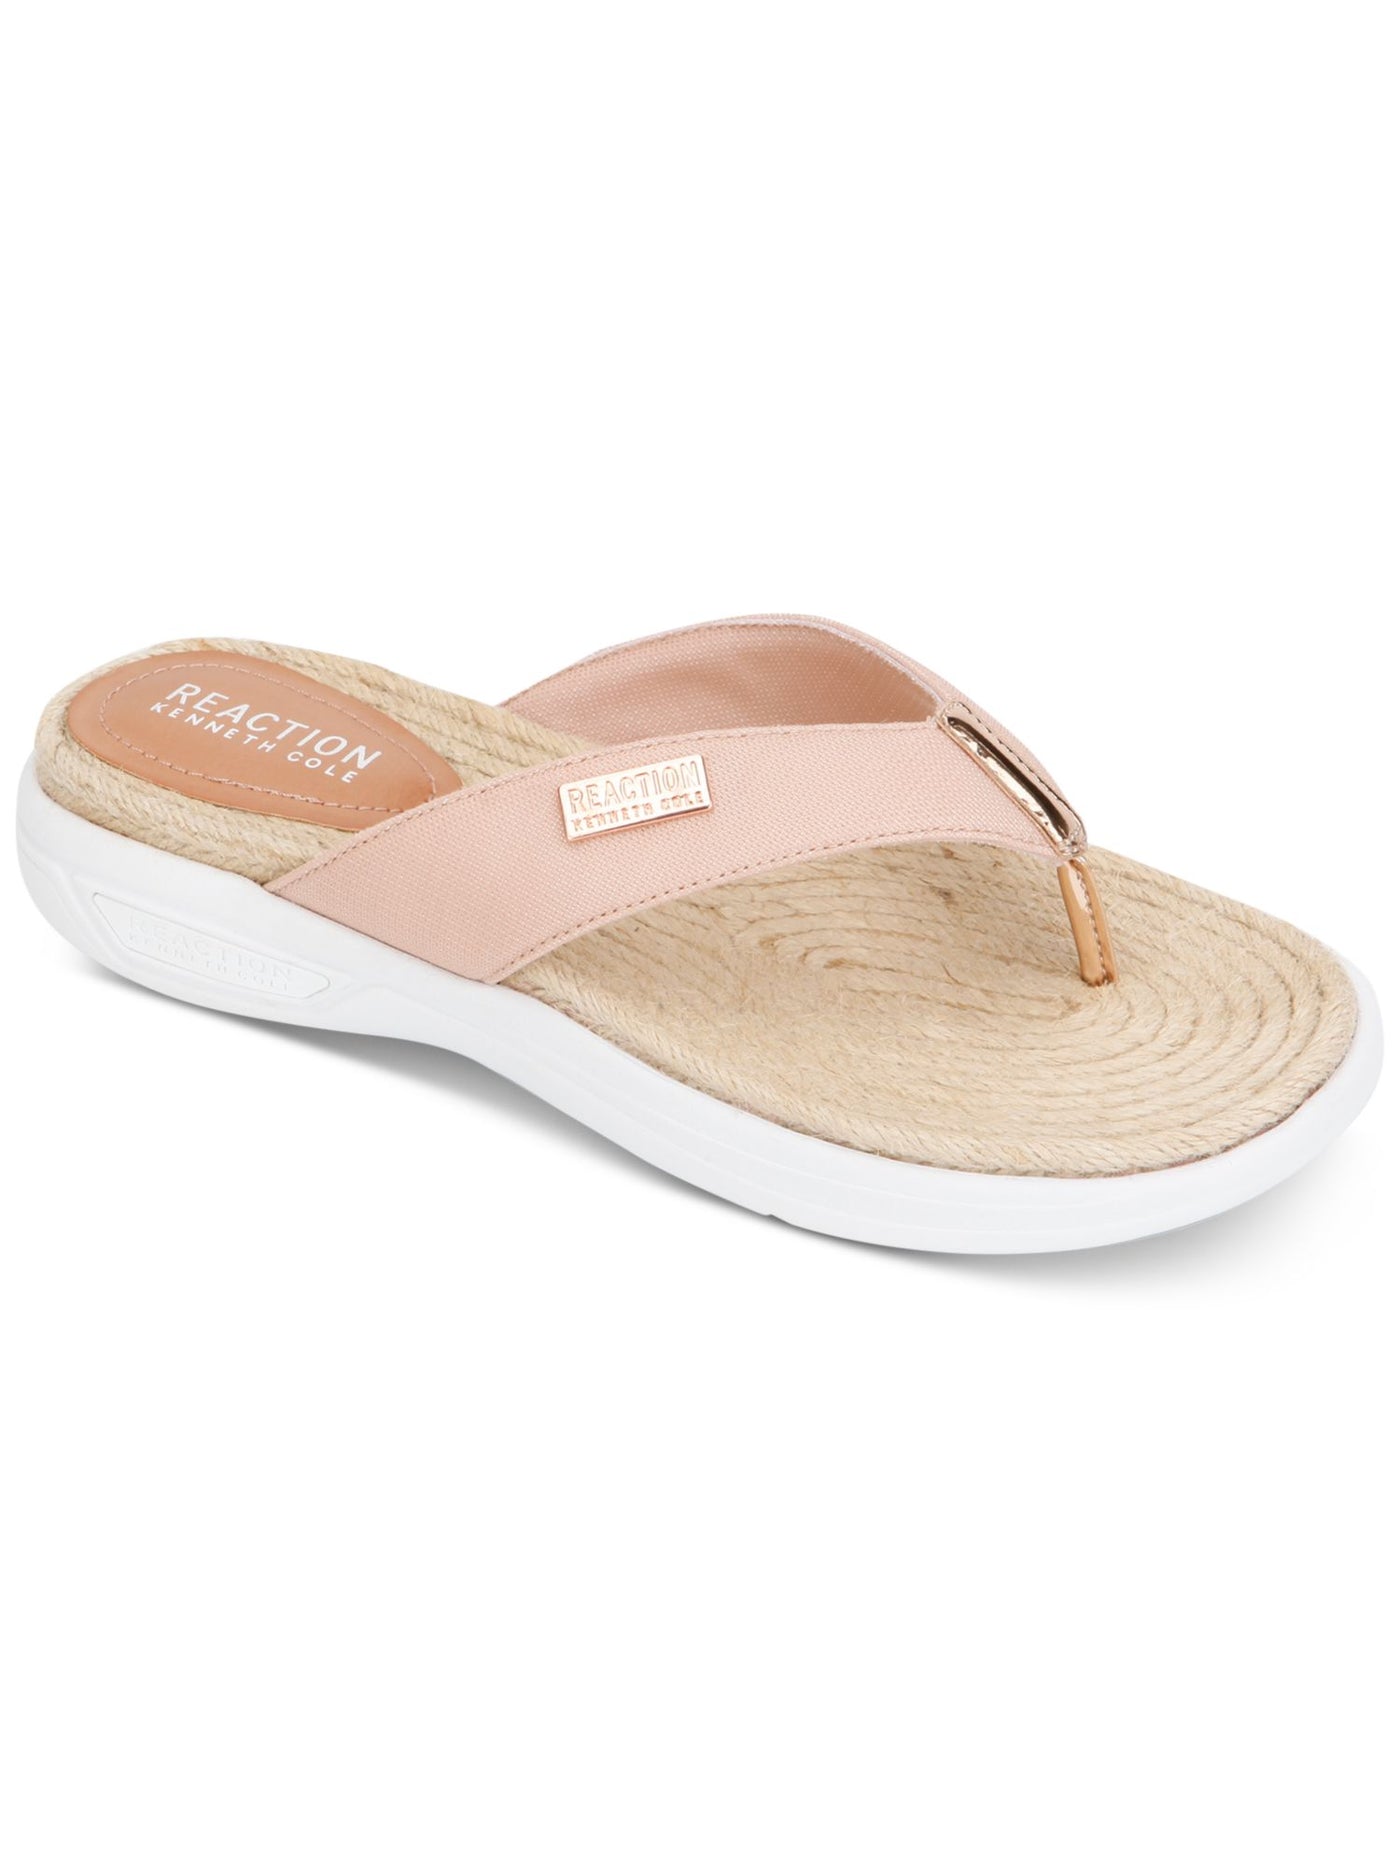 KENNETH COLE Womens Pink Jute Insole Logo Cushioned Ready Round Toe Wedge Slip On Flip Flop Sandal 5 M